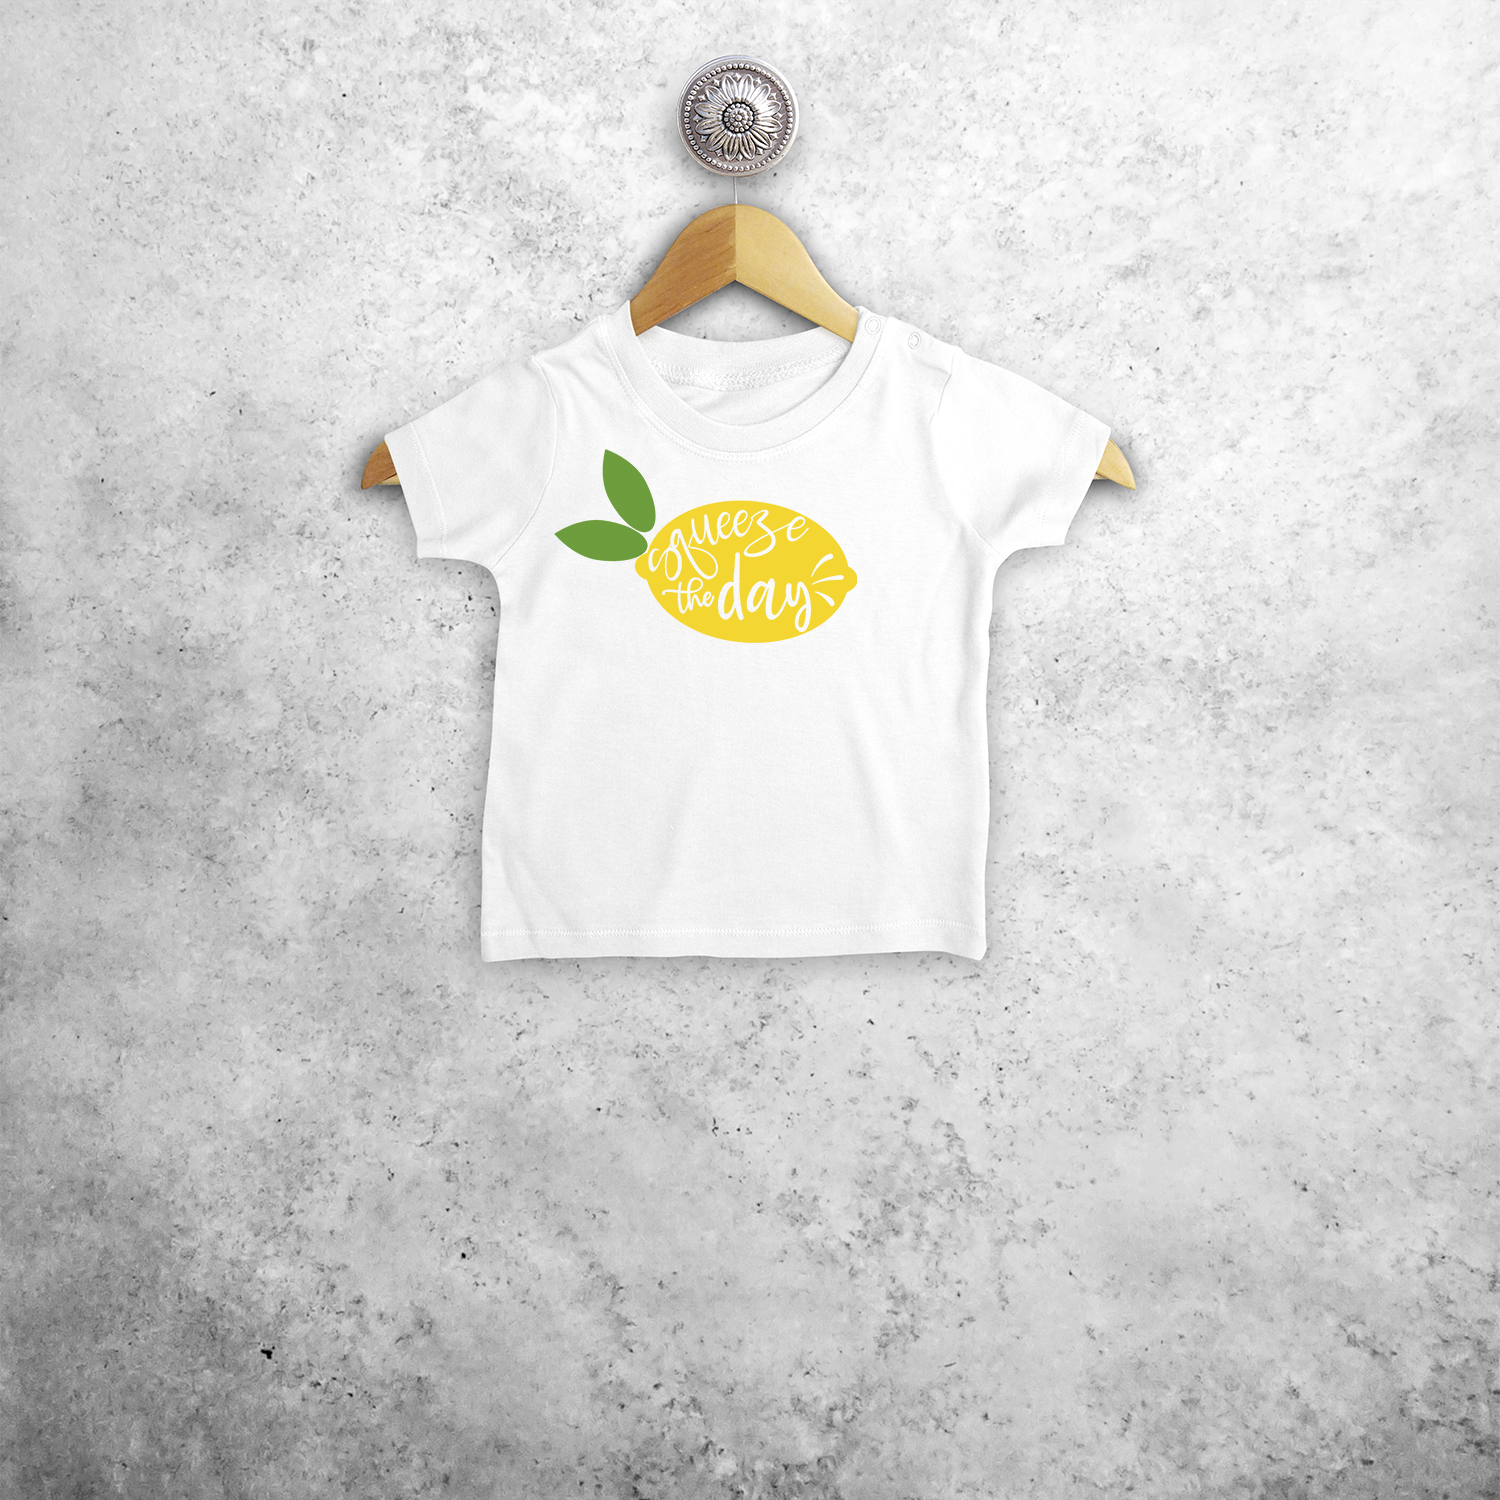 'Squeeze the day' baby shortsleeve shirt